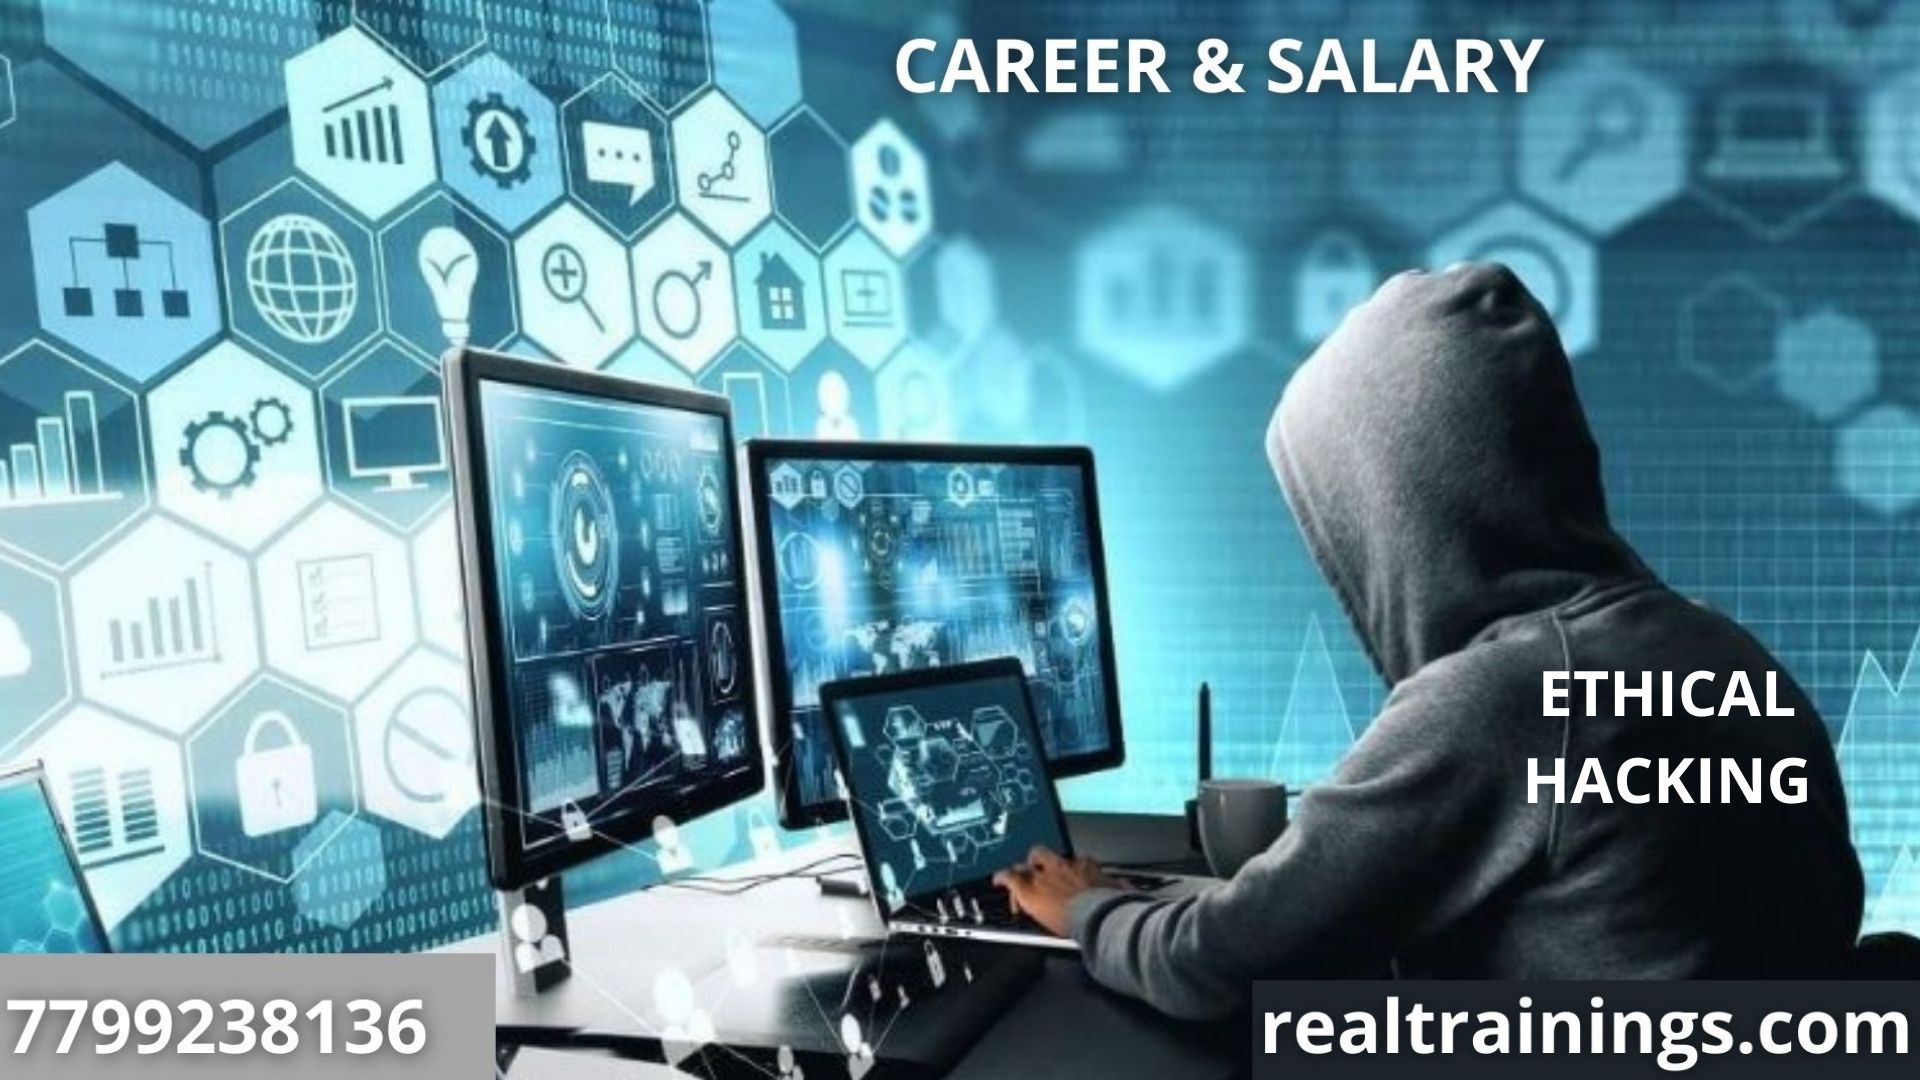 Ethical Hacking Career & Salary